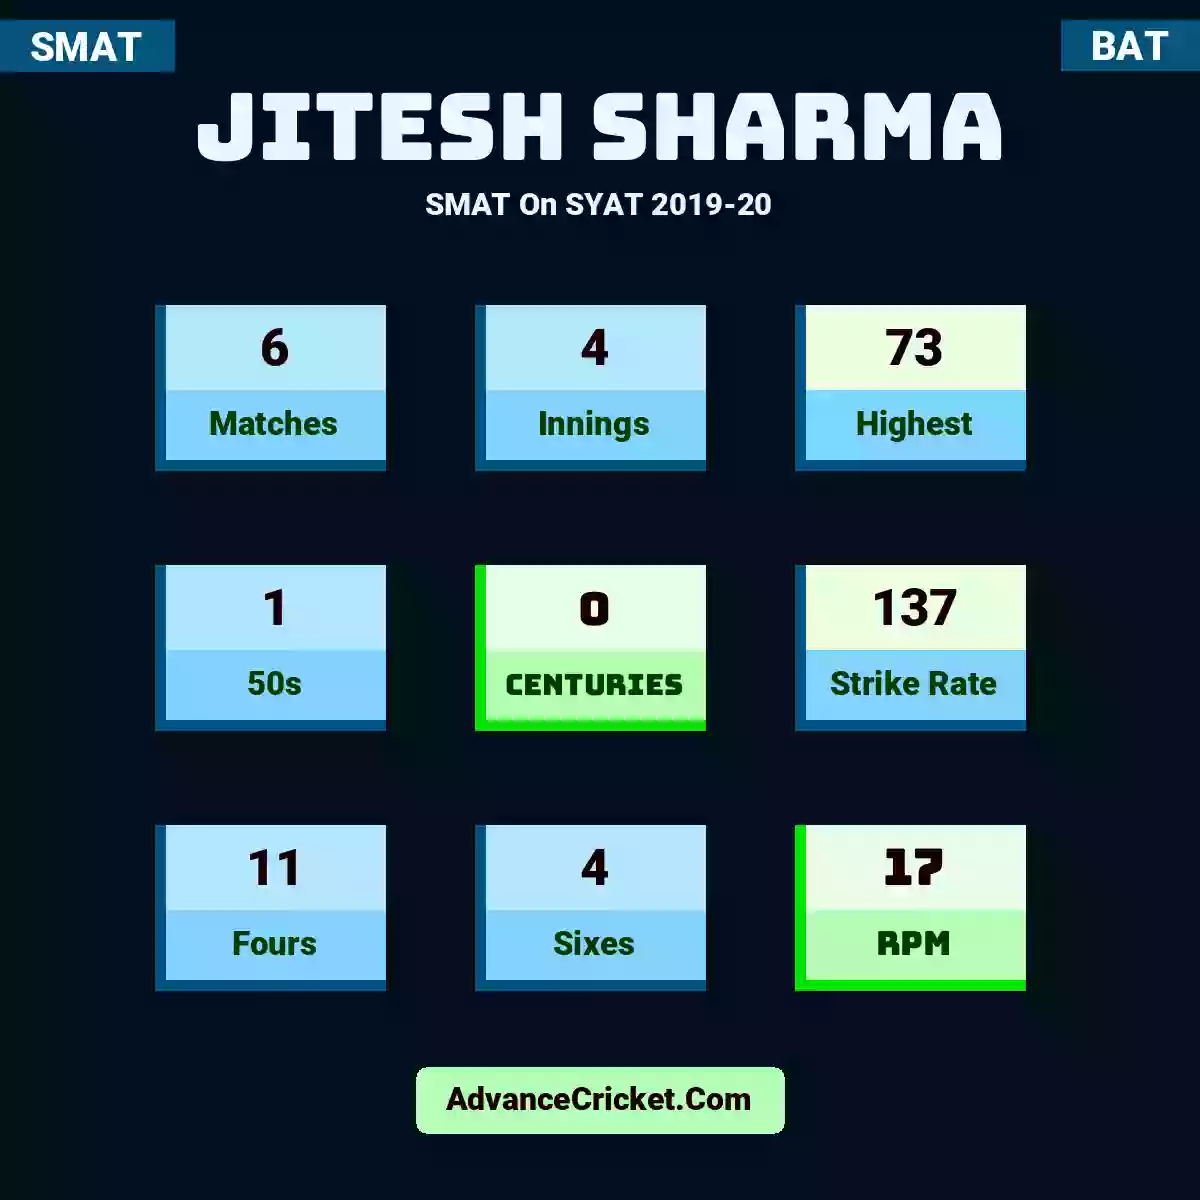 Jitesh Sharma SMAT  On SYAT 2019-20, Jitesh Sharma played 6 matches, scored 73 runs as highest, 1 half-centuries, and 0 centuries, with a strike rate of 137. J.Sharma hit 11 fours and 4 sixes, with an RPM of 17.